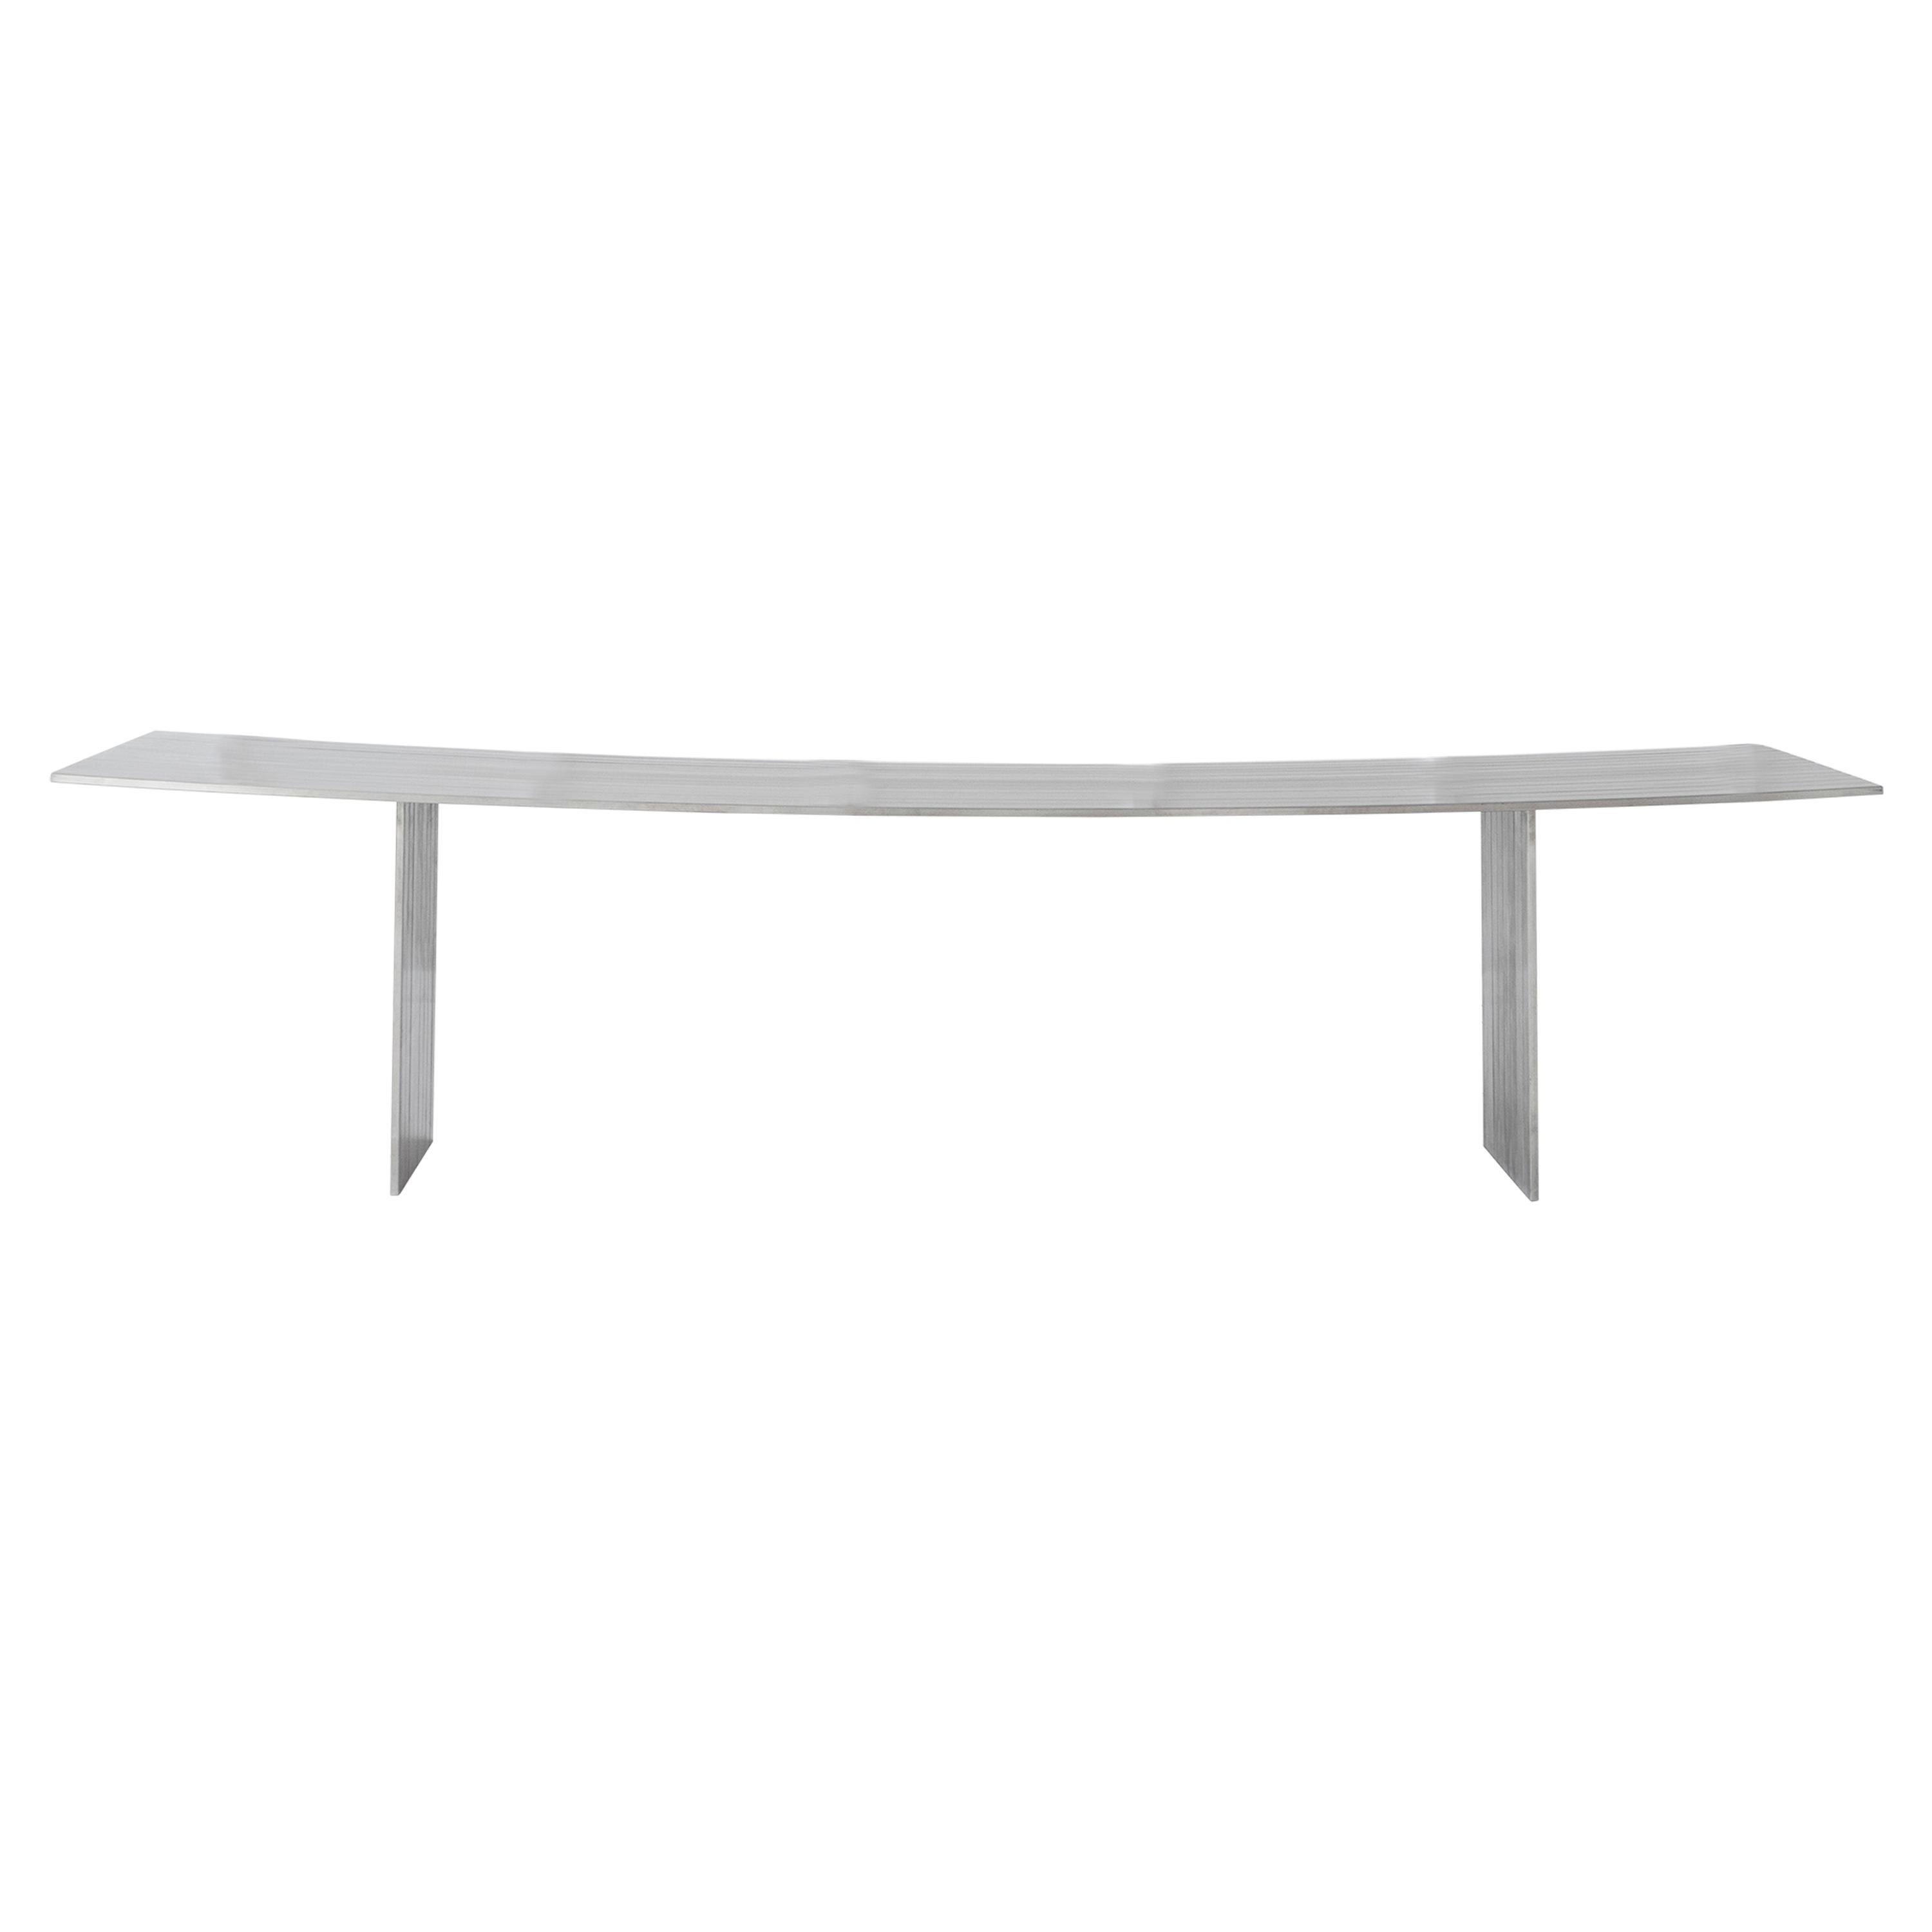 Lunae Contemporary Bench in Stainless Steel